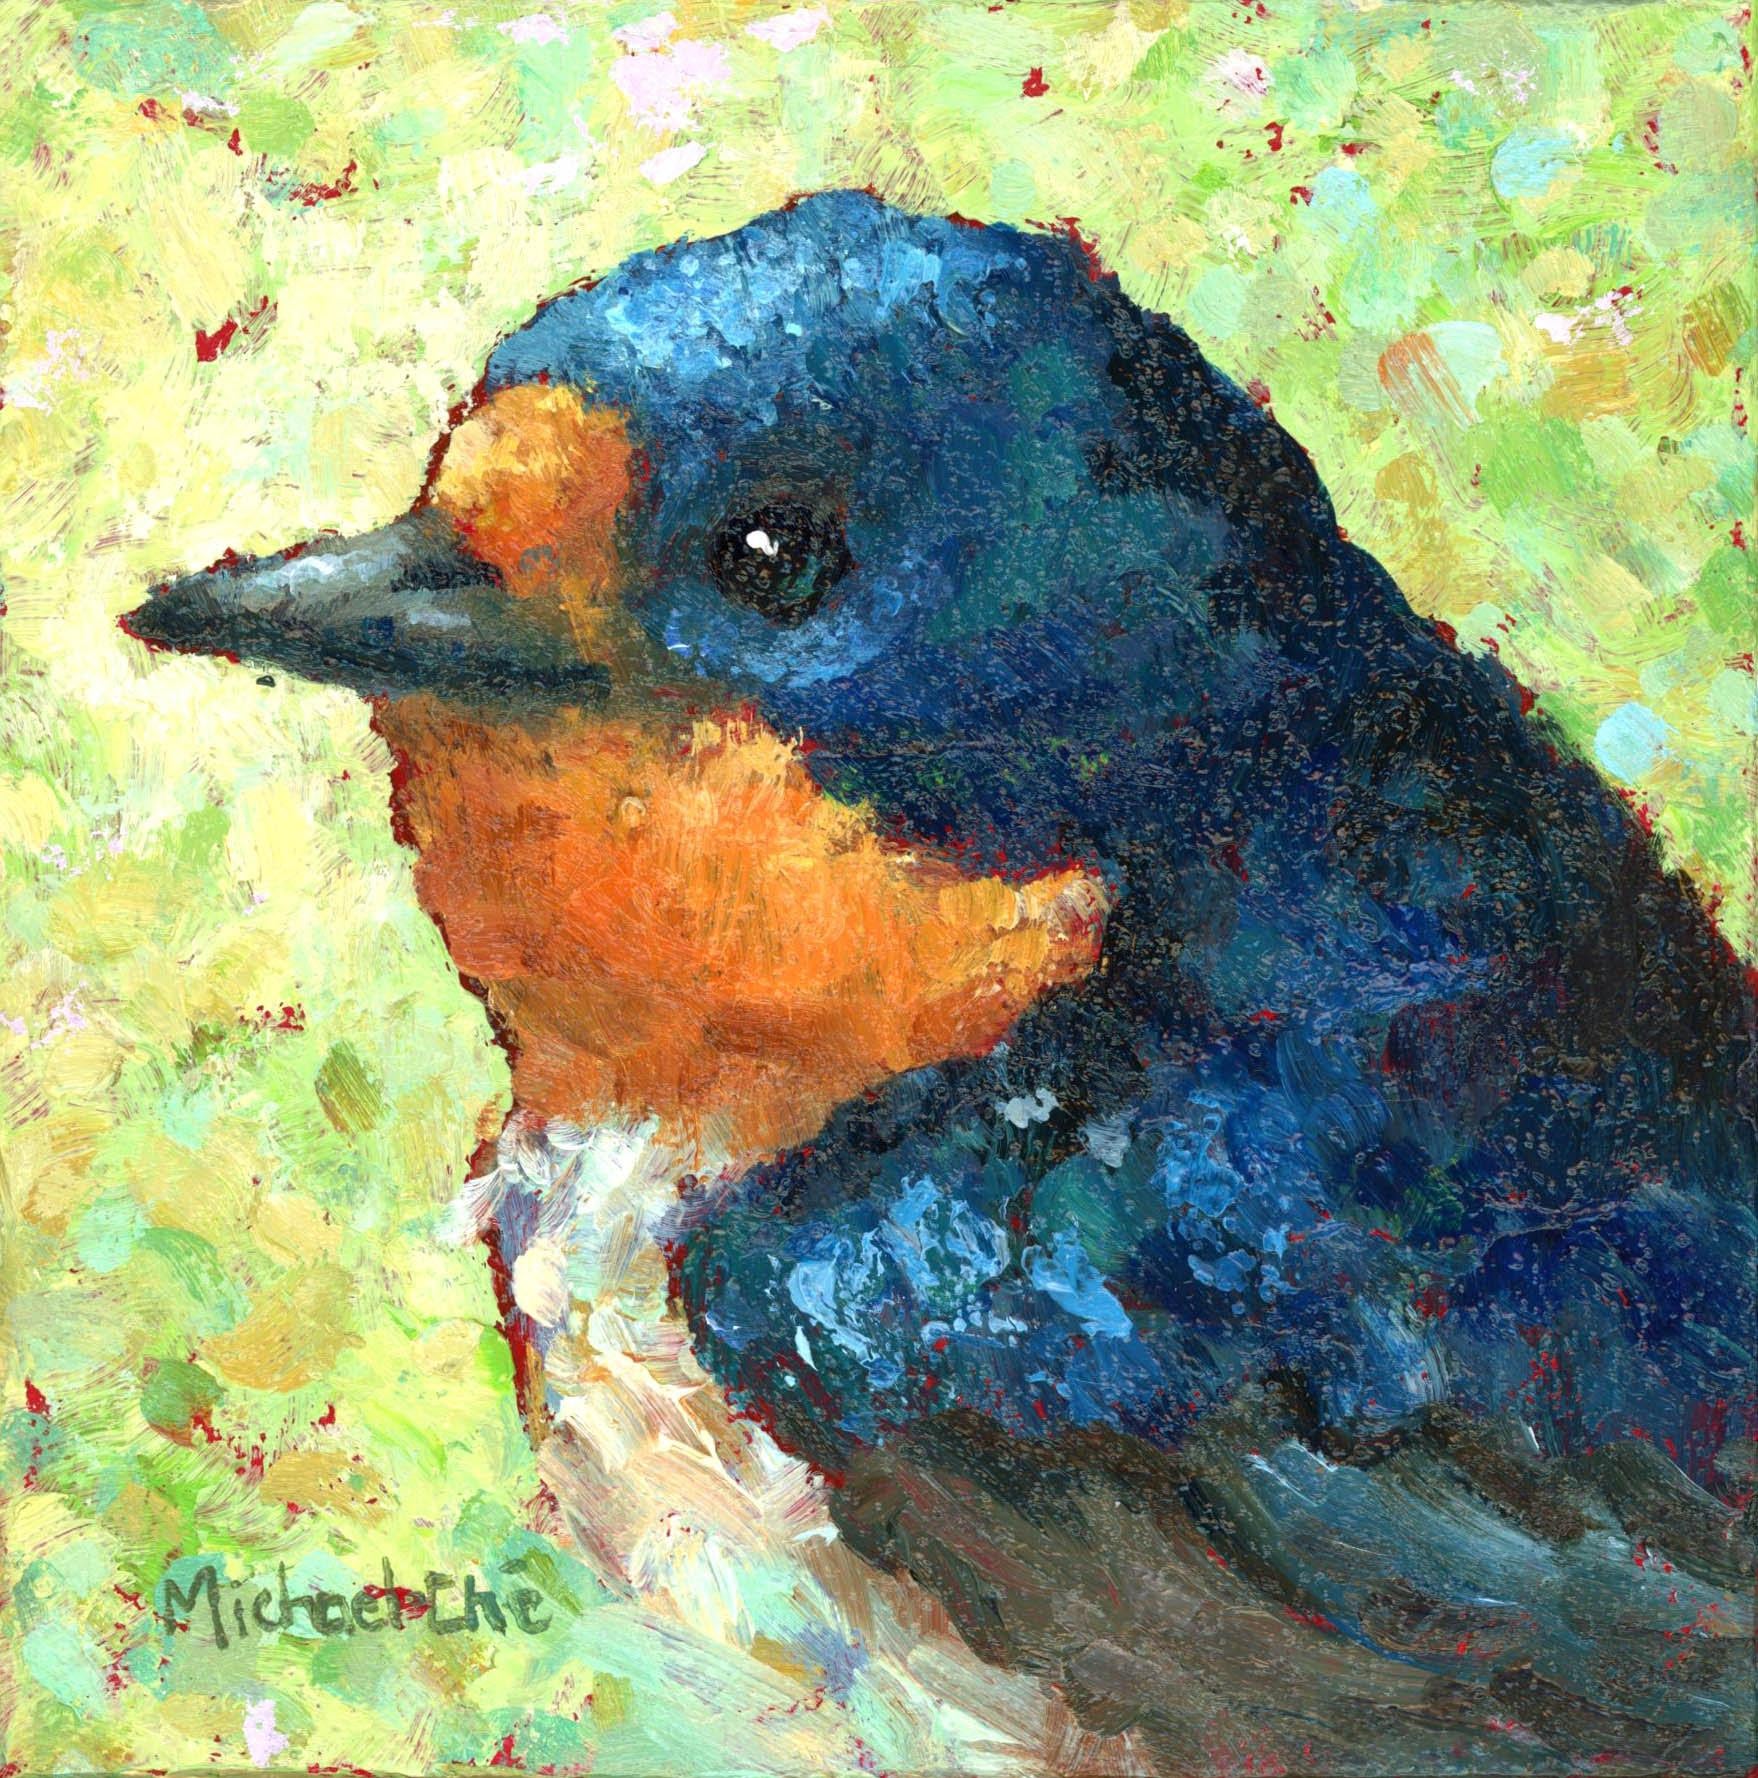 Michael-Che Swisher Animal Painting - "Wise and Wonderful" Impasto oil painting of a blue bird on yellow/green 